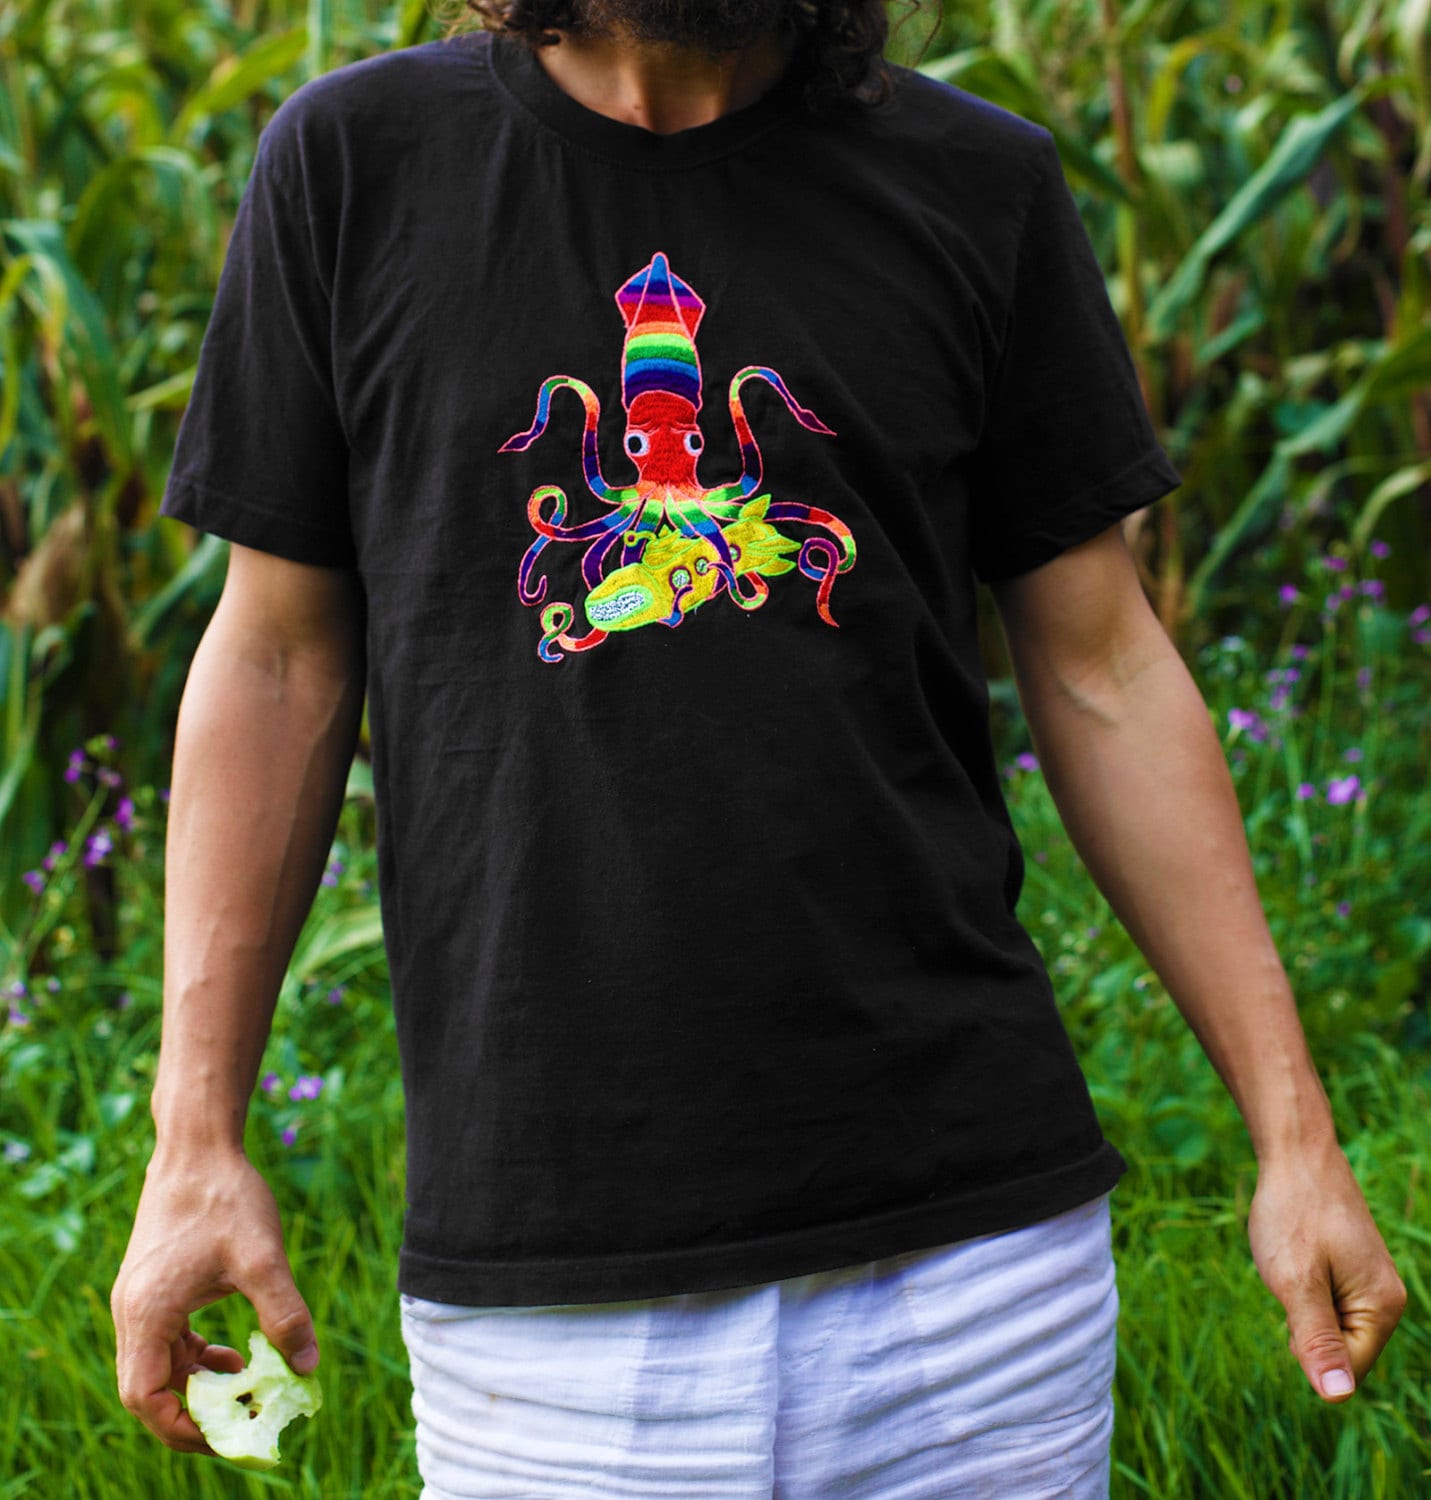 Yellow Submarine Squid T-Shirt - LSD blacklight glowing handmade embroidery flower of life on backside psychedelic rainbow Timothy Leary art